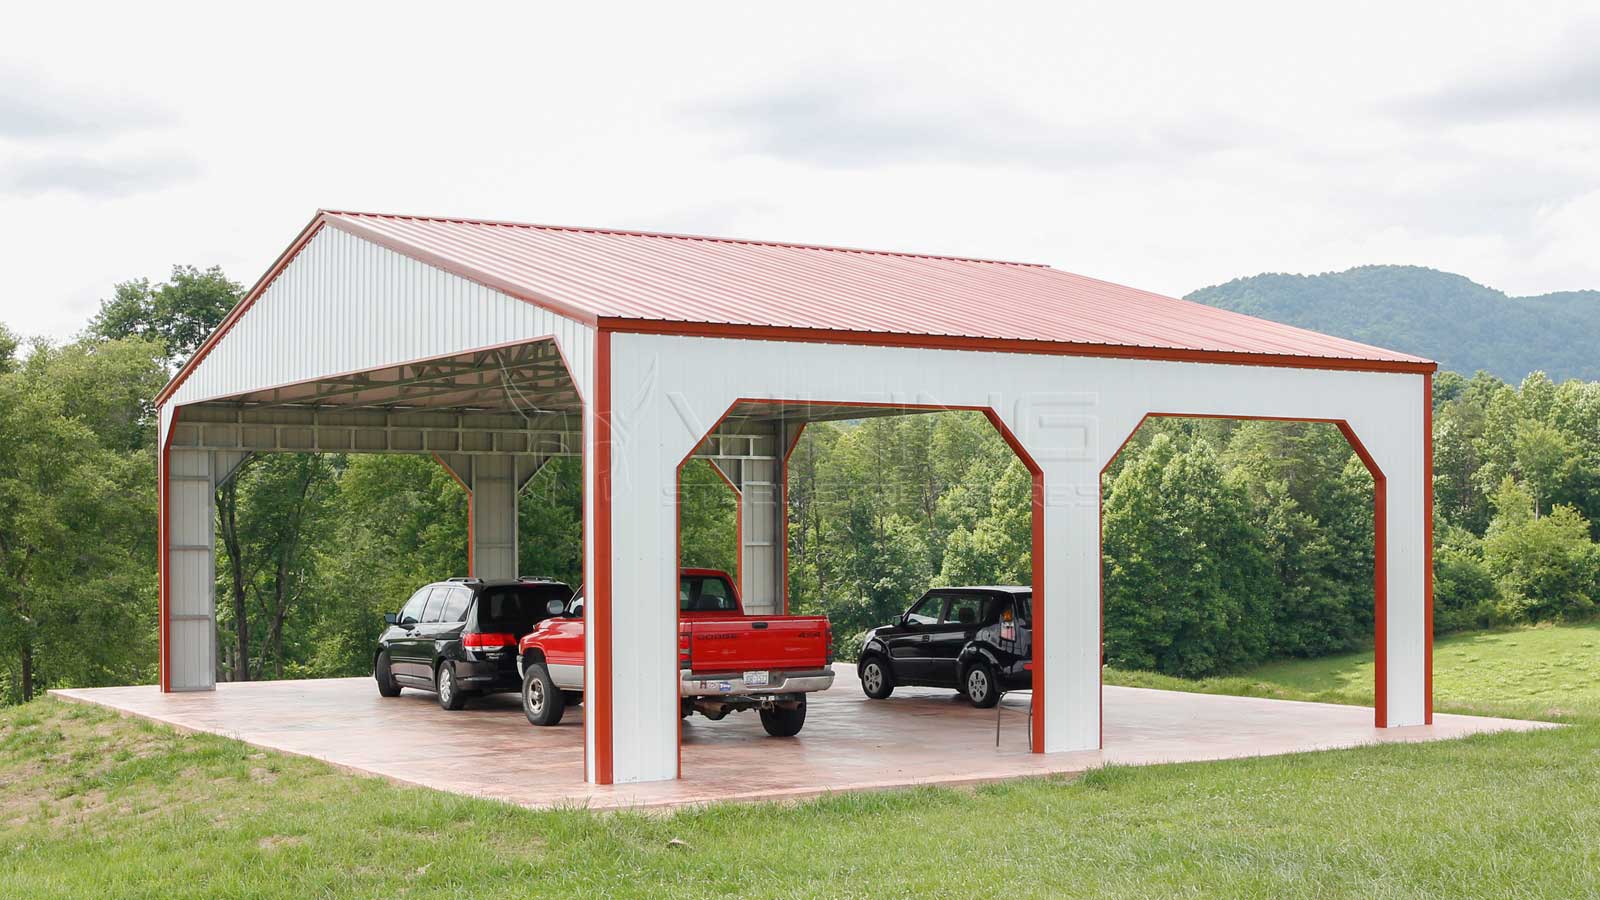 Should You Buy New or Used Metal Carports?